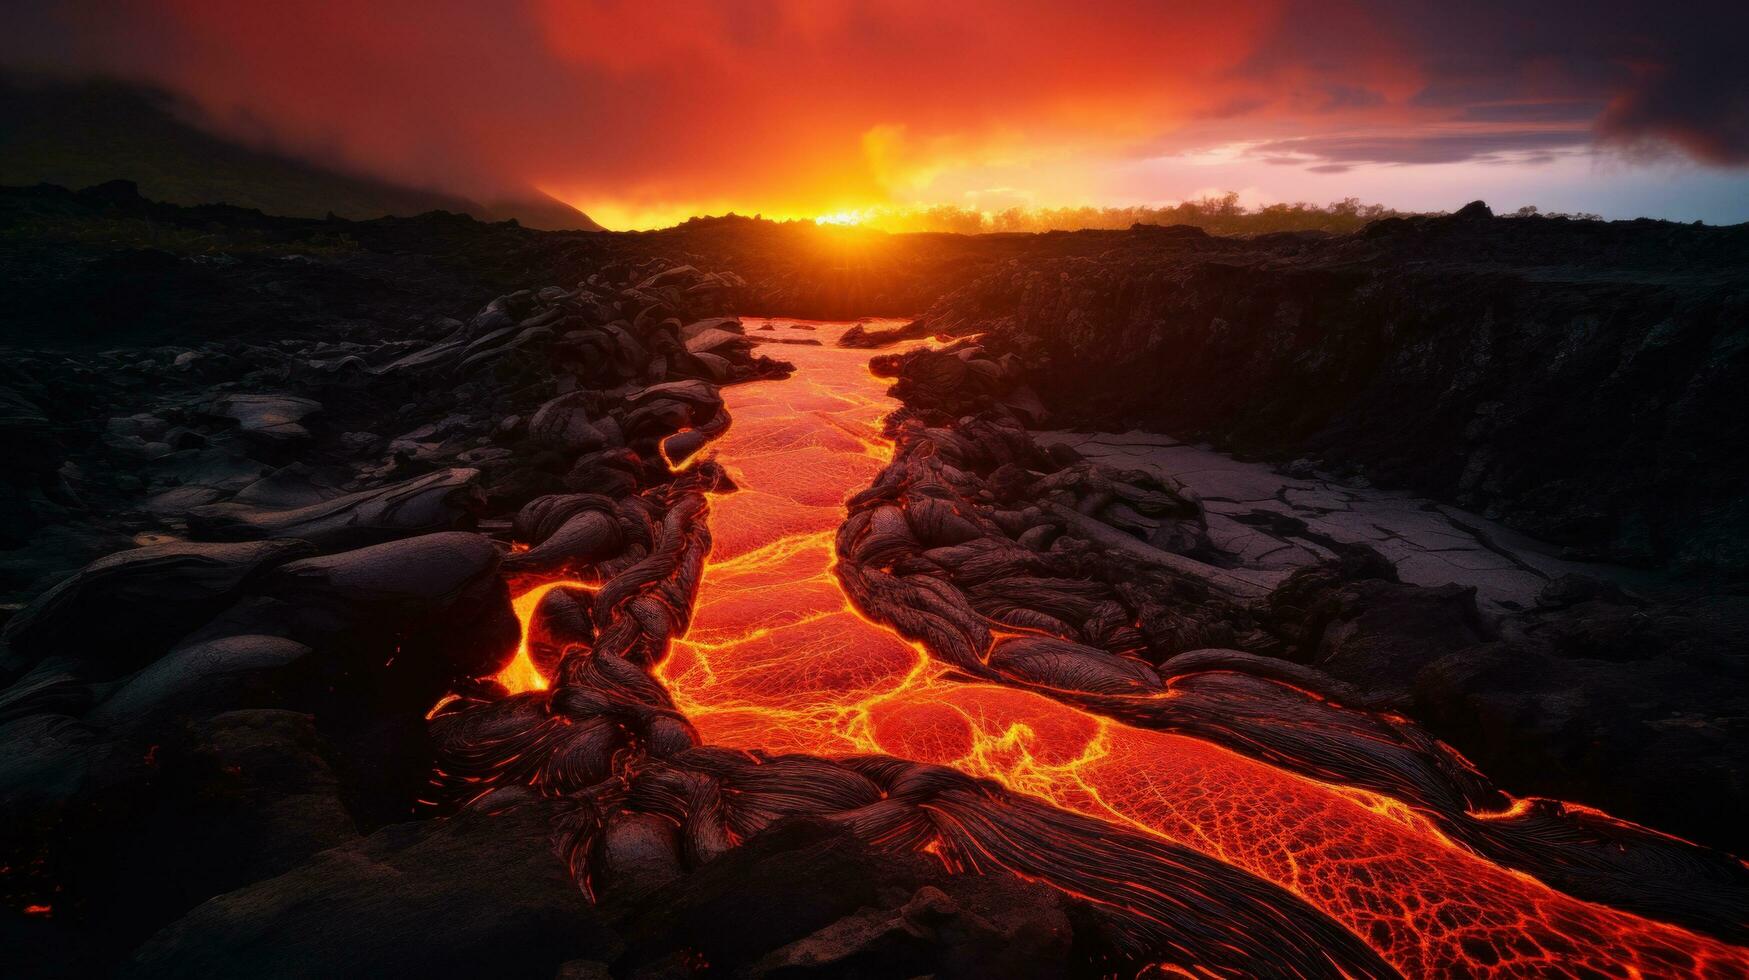 AI generated heat and energy of a volcano's lava captures the molten rock as it cascades down the mountainside photo